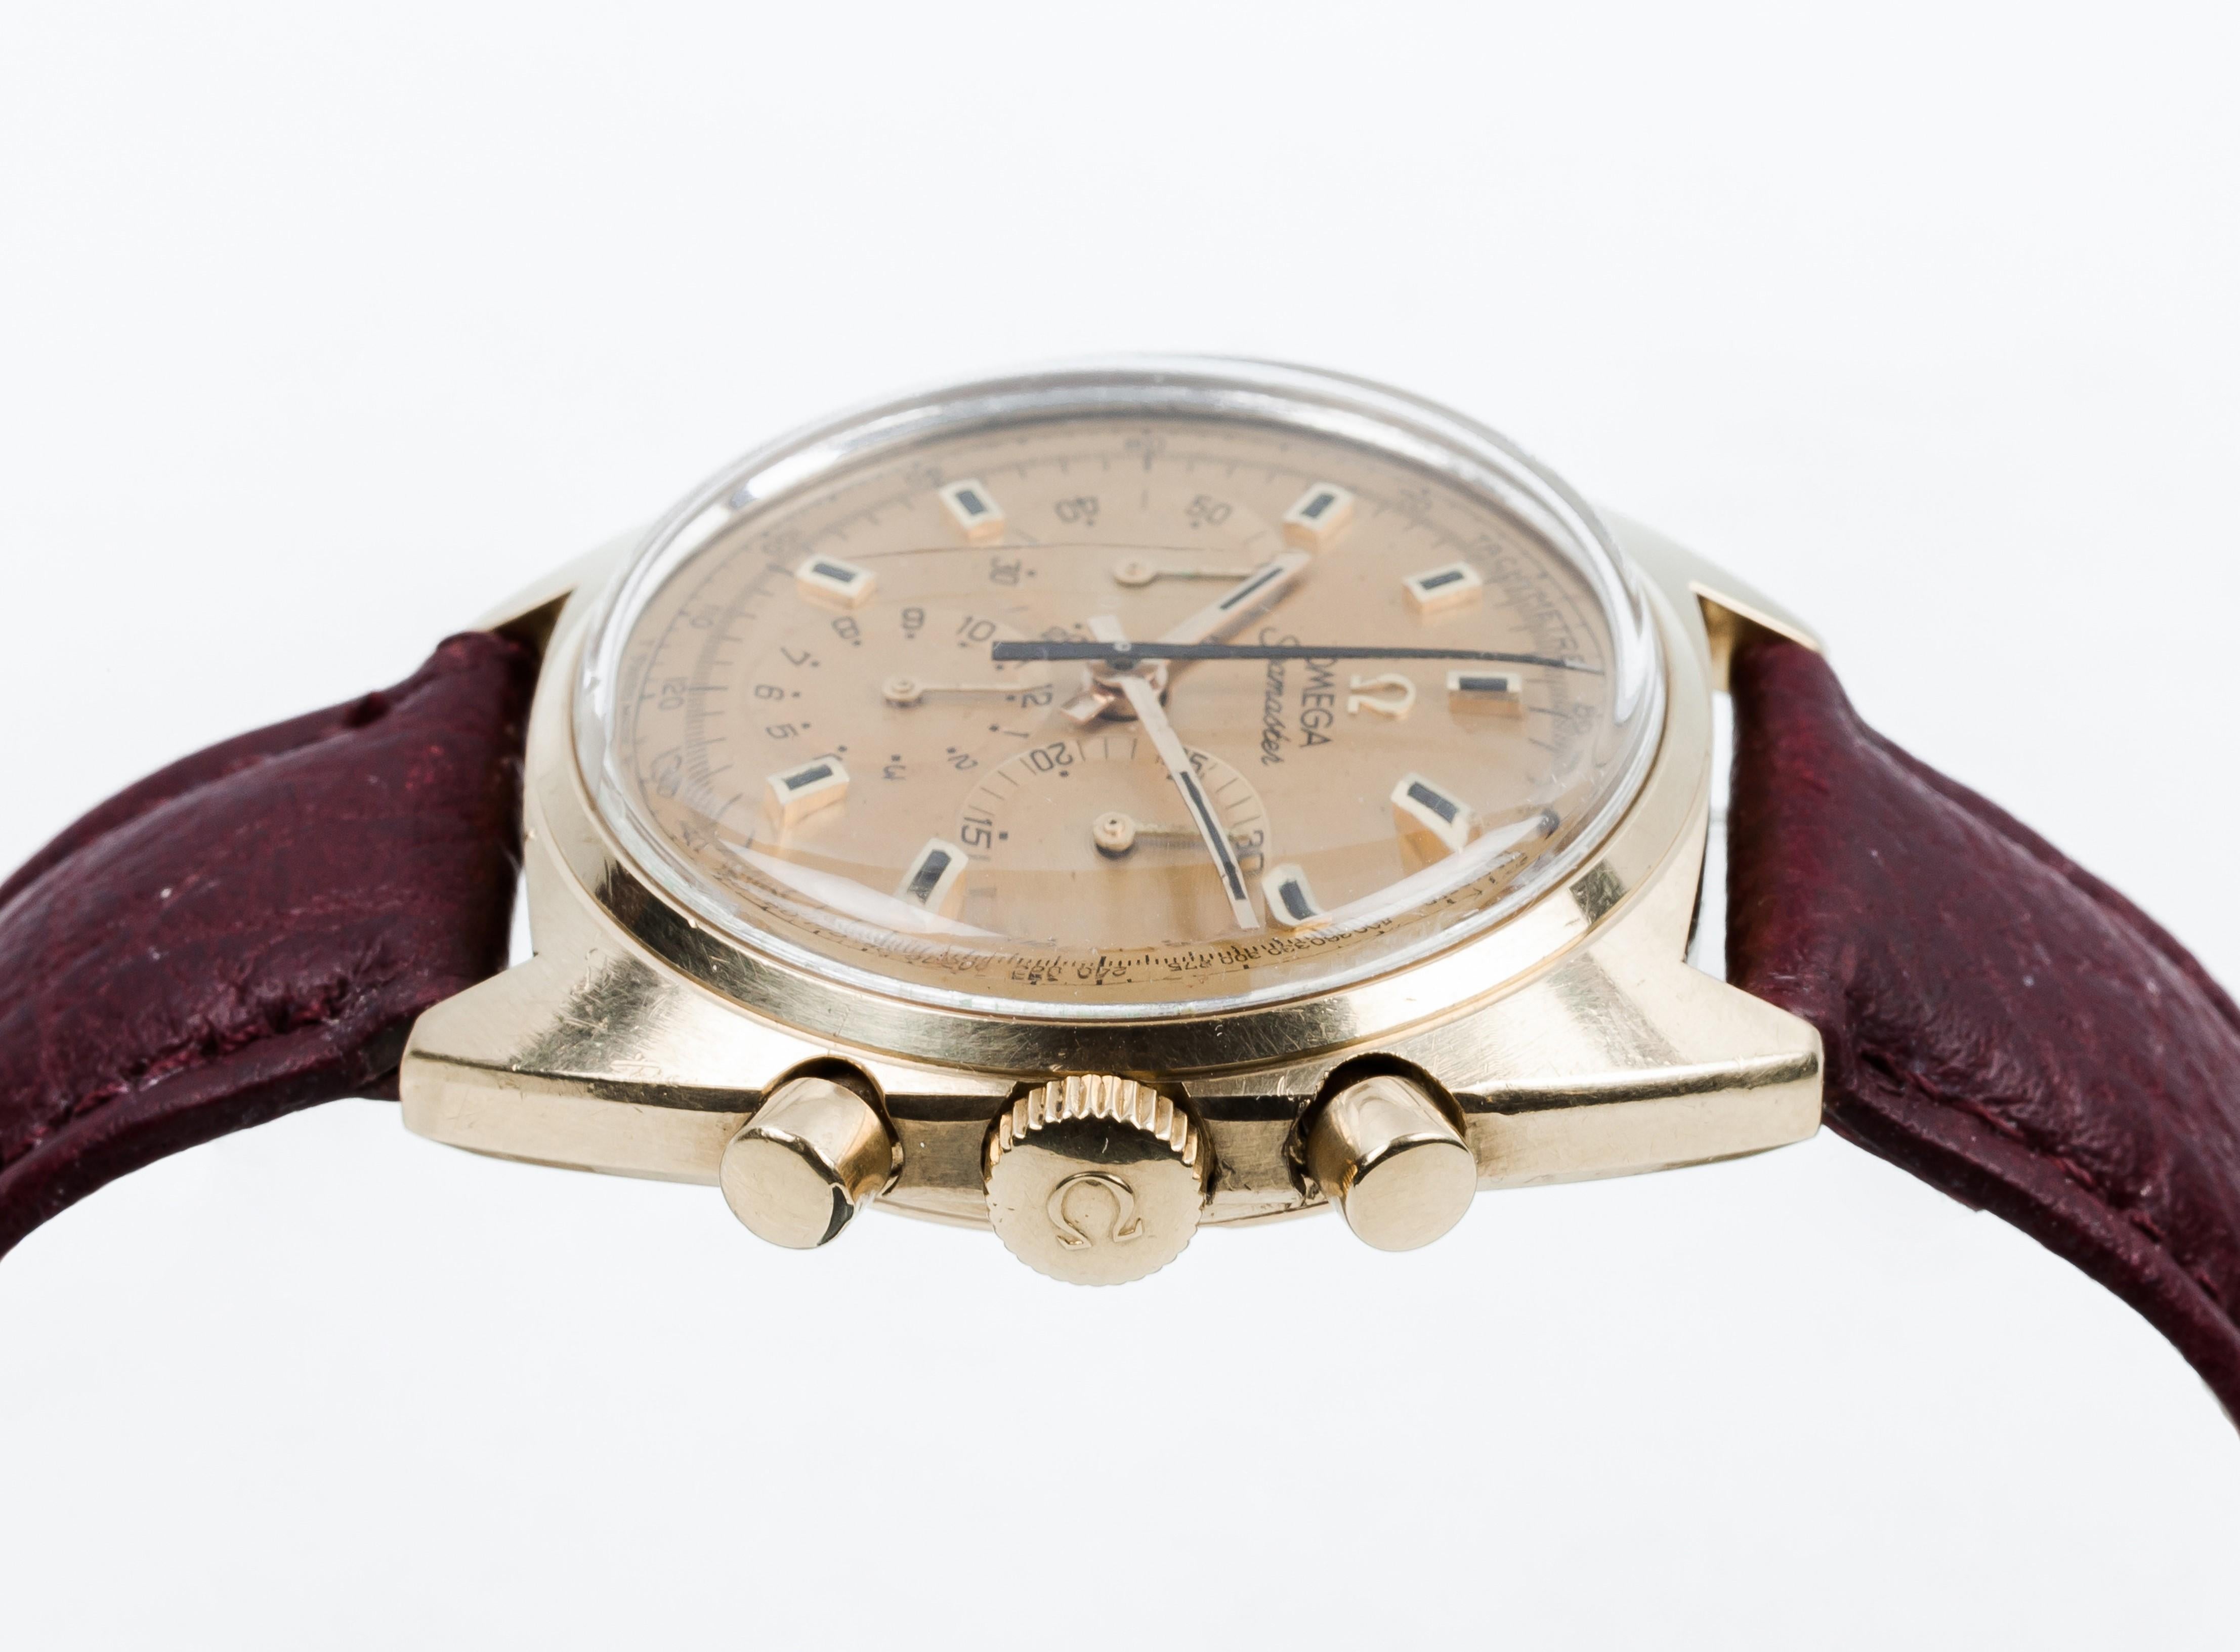 Brilliant Cut 1968 Omega Saemaster Chronograph Yellow Gold Leather Strap For Sale